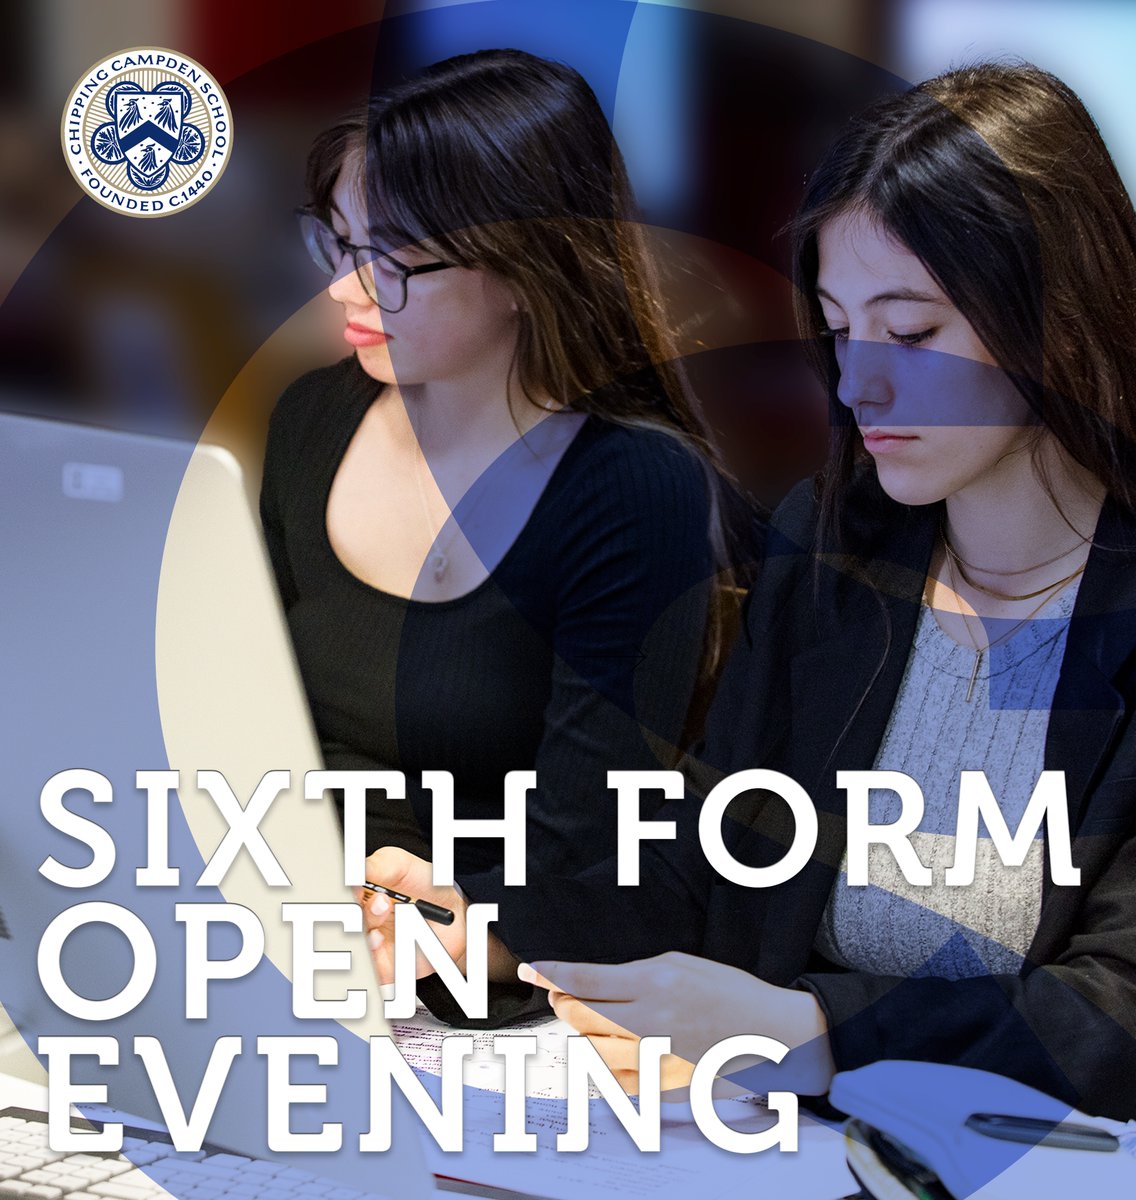 Our Sixth Form Open Evening is just a few days away. Join us on Thursday, November 9th from 5.15 PM for an informative evening. Get ready to explore your academic options and learn about our programs. See you there! #SixthFormOpenEvening #ChippingCampden